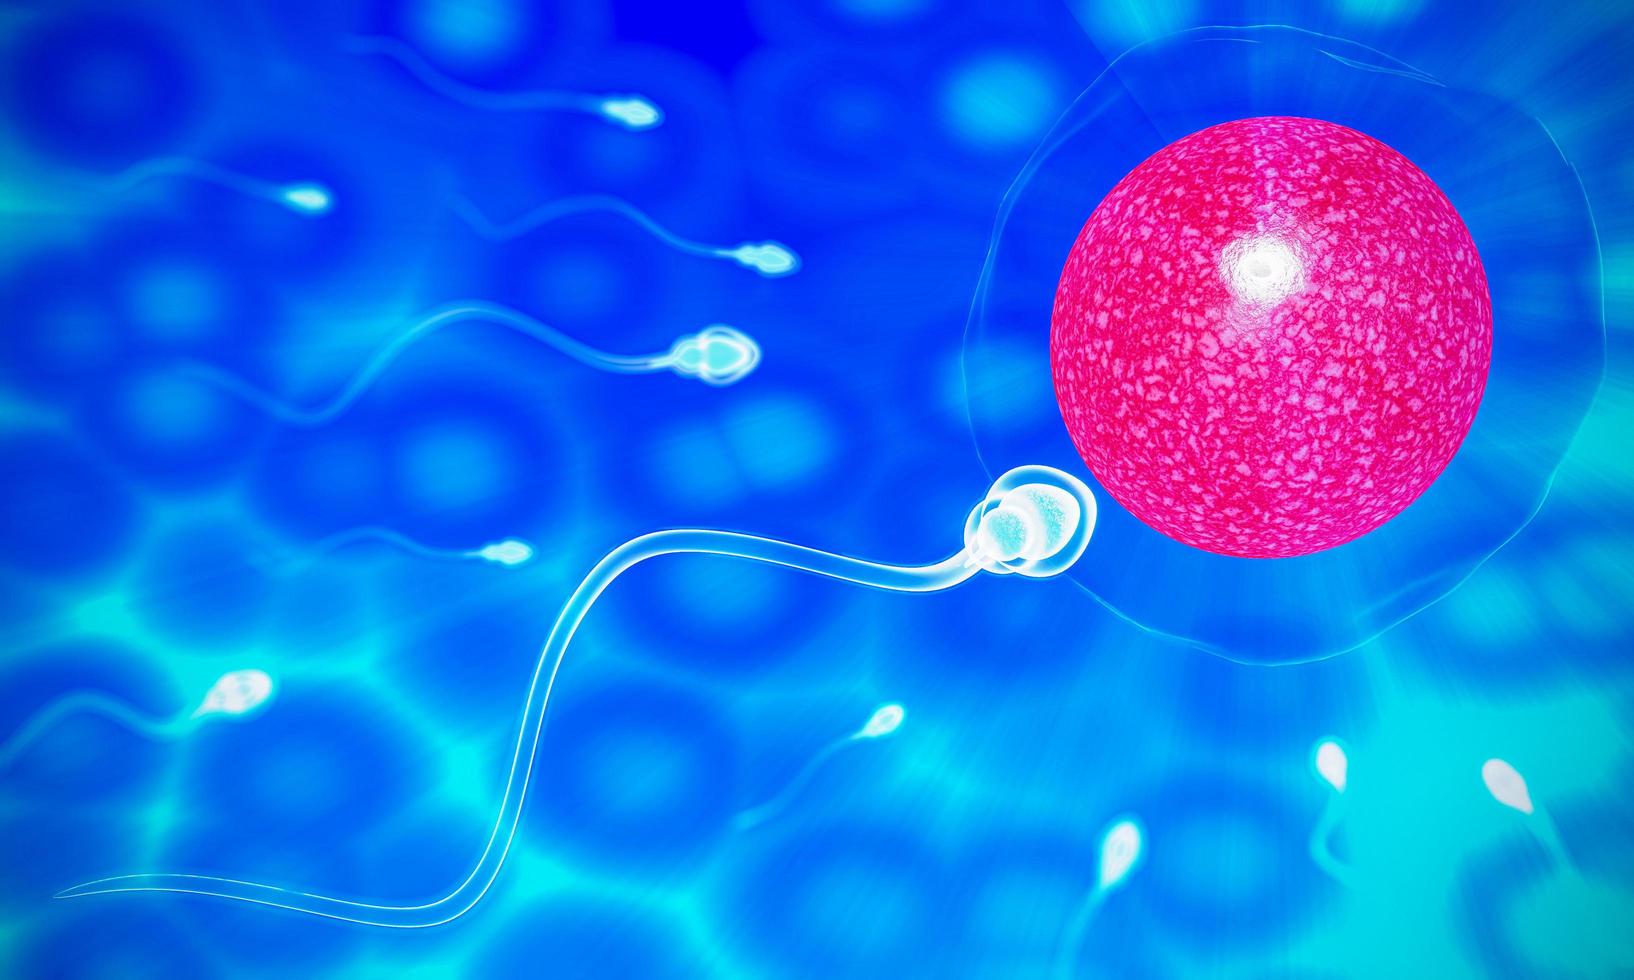 The sperm fertility from men's cum is directed towards the egg bubble after sex. To do human mating. A pre-fertilization model between an egg and a sperm. 3D Rendering photo